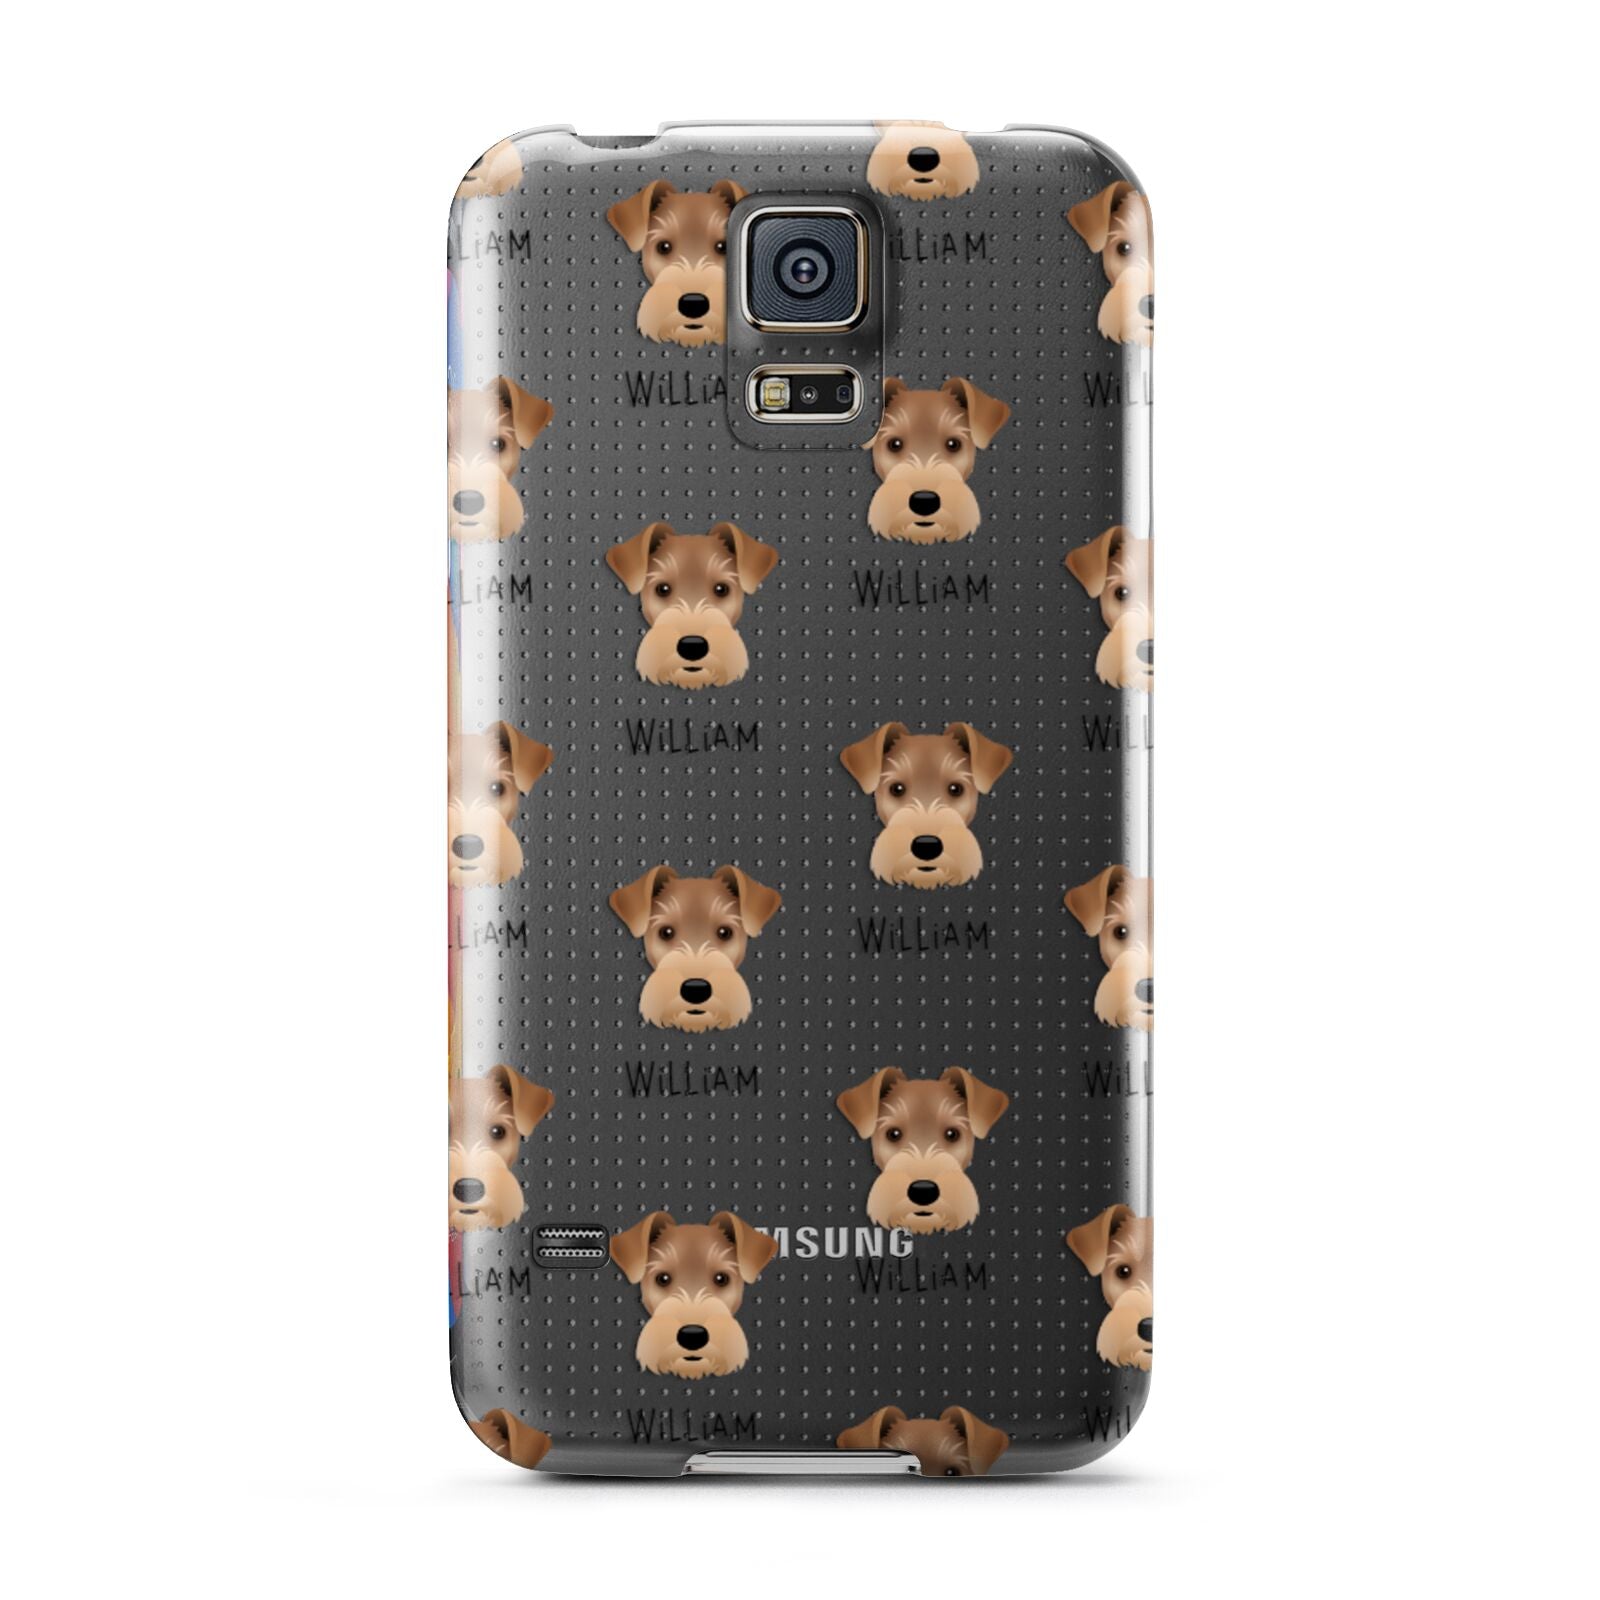 Welsh Terrier Icon with Name Samsung Galaxy S5 Case